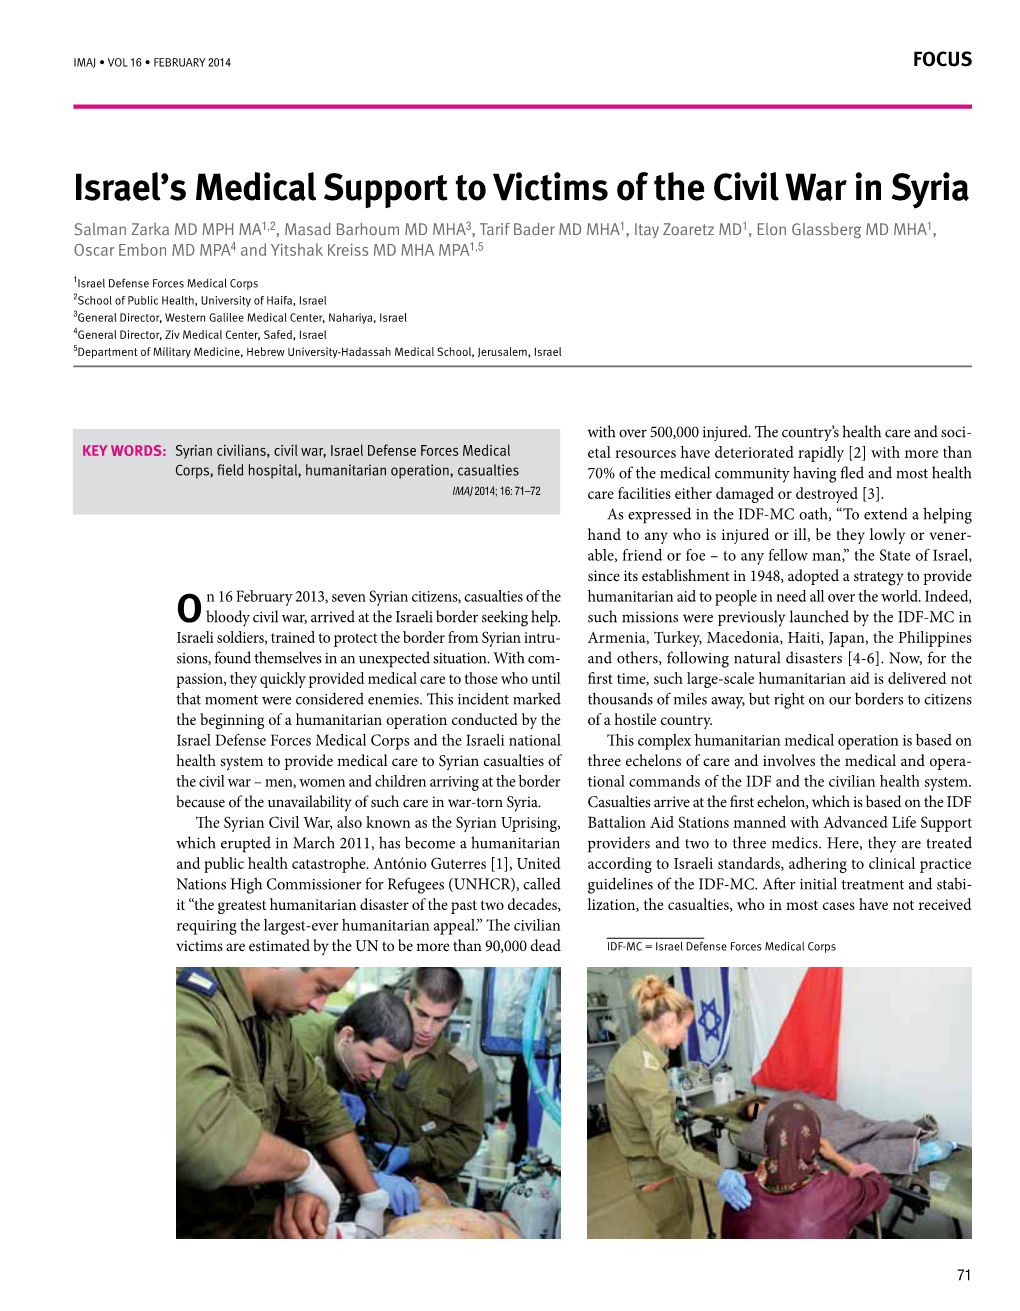 Israel's Medical Support to Victims of the Civil War in Syria